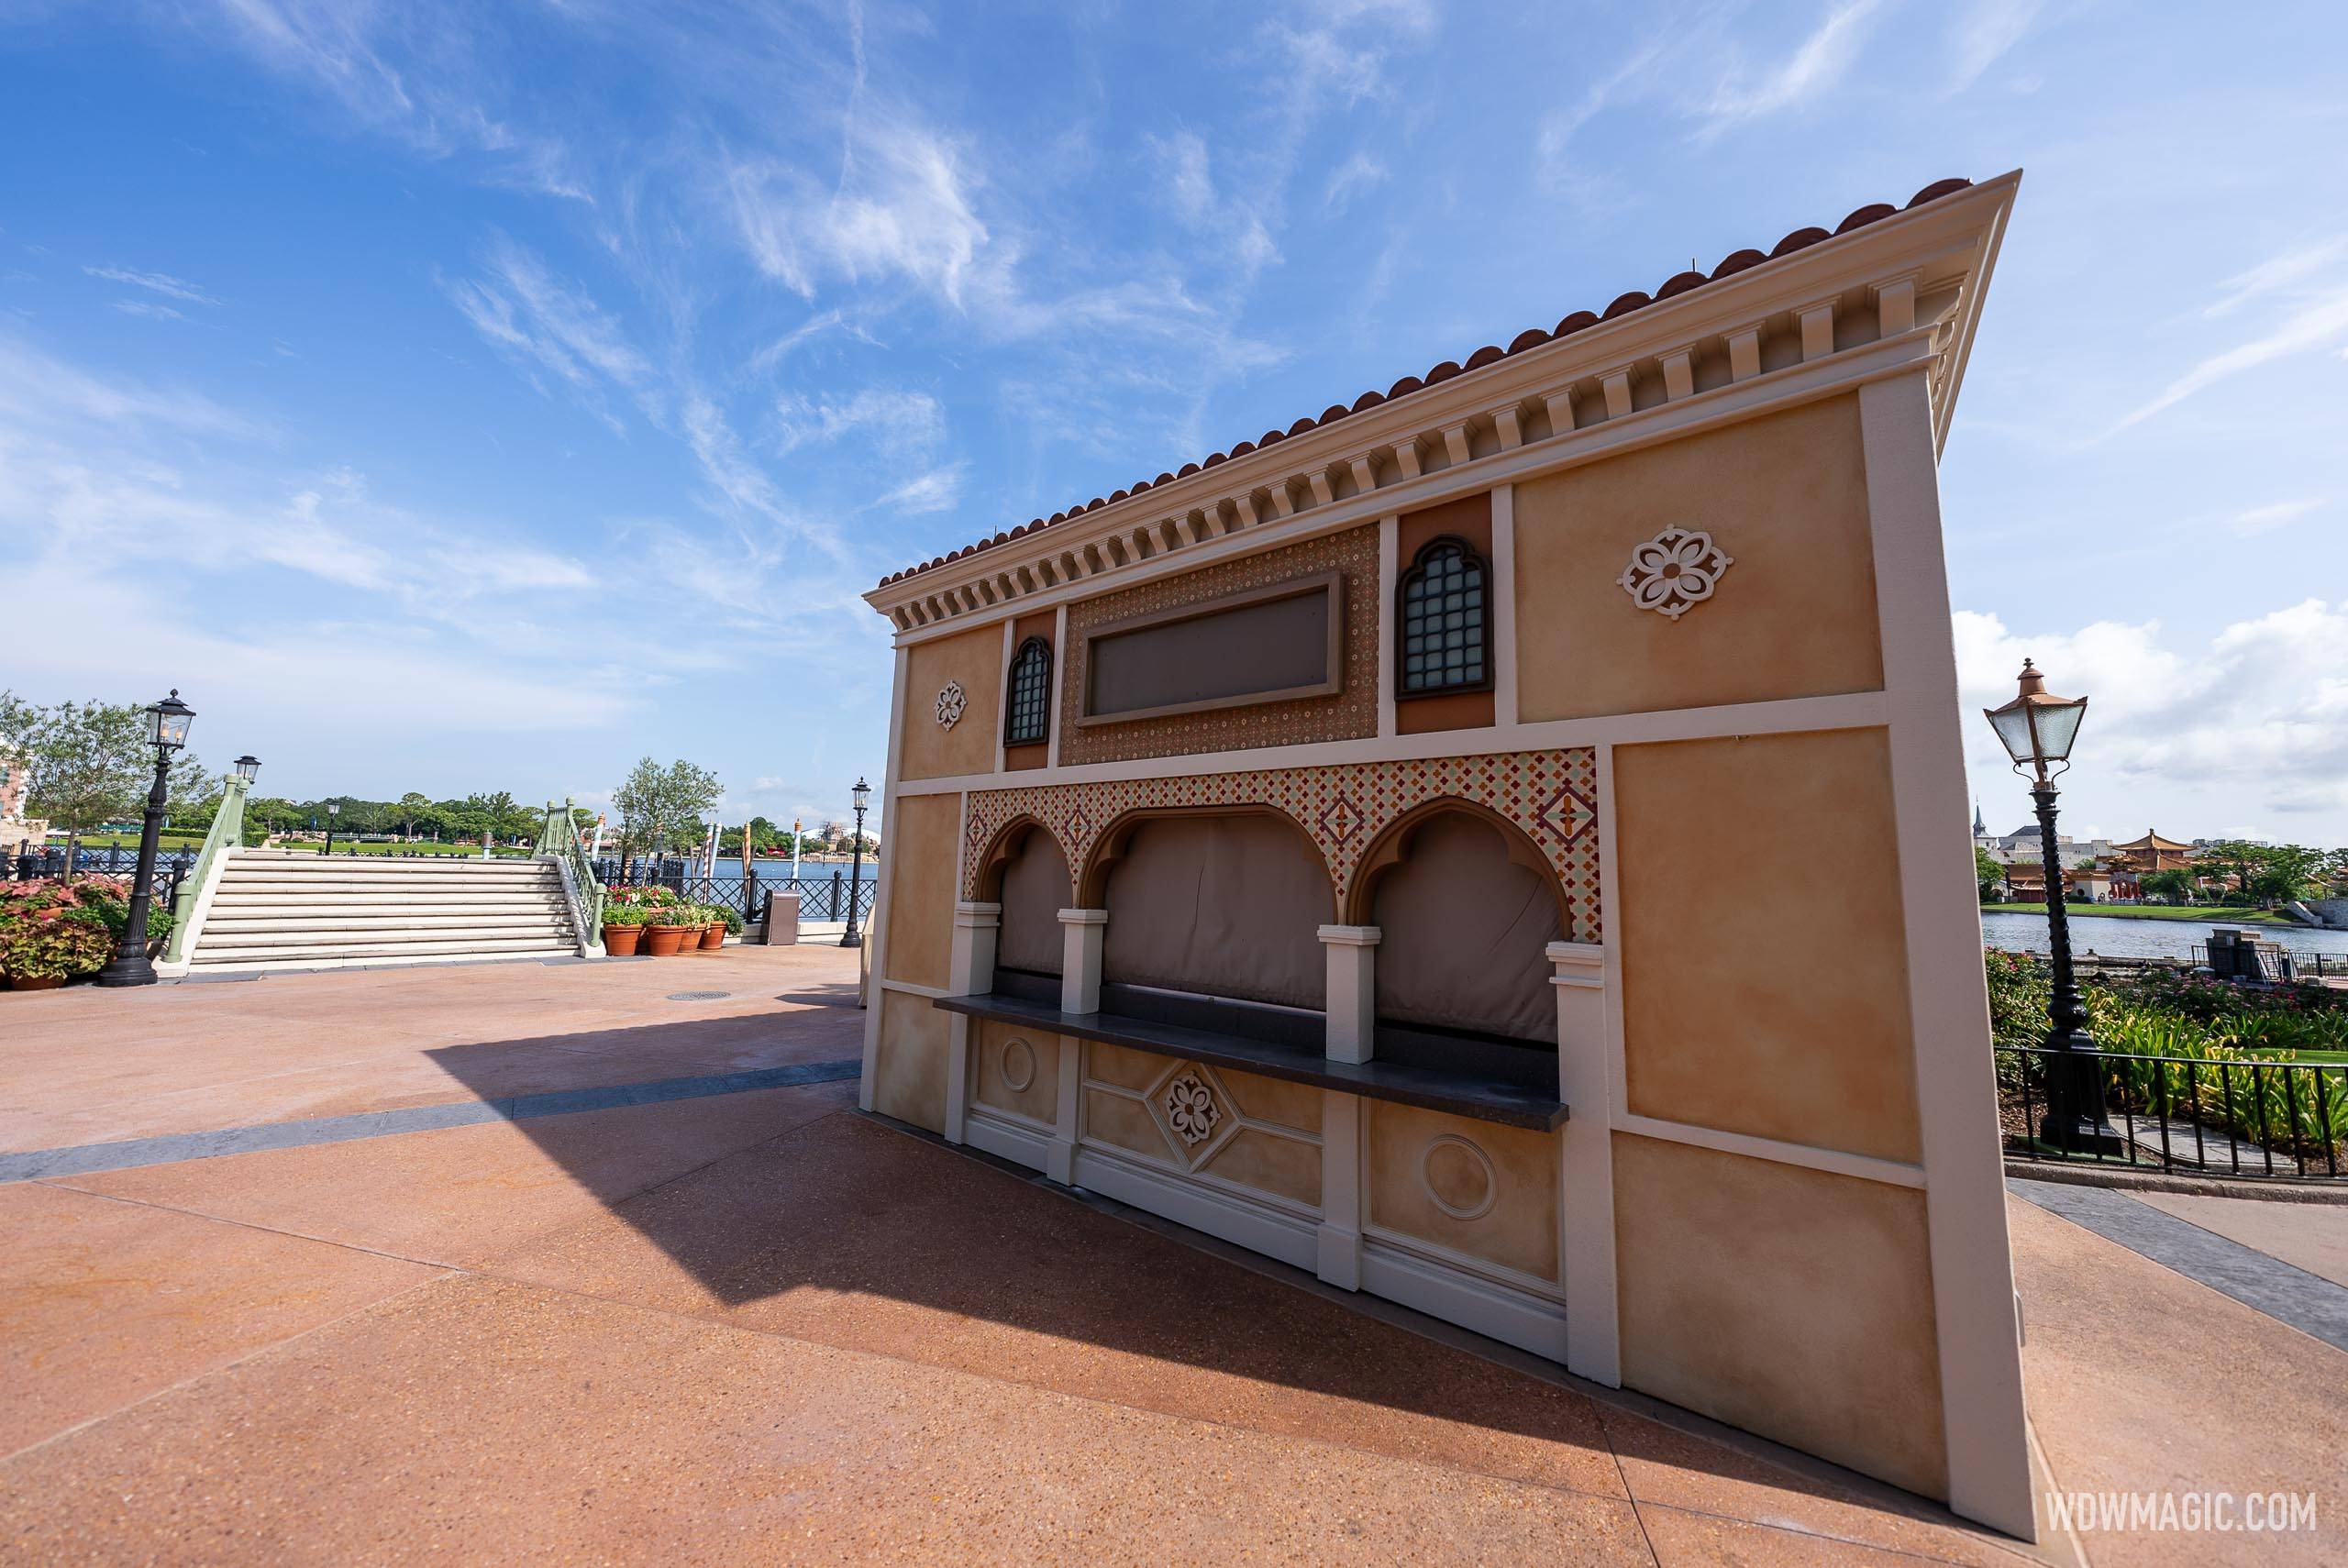 Preparations of the 2023 EPCOT International Food and Wine Festival